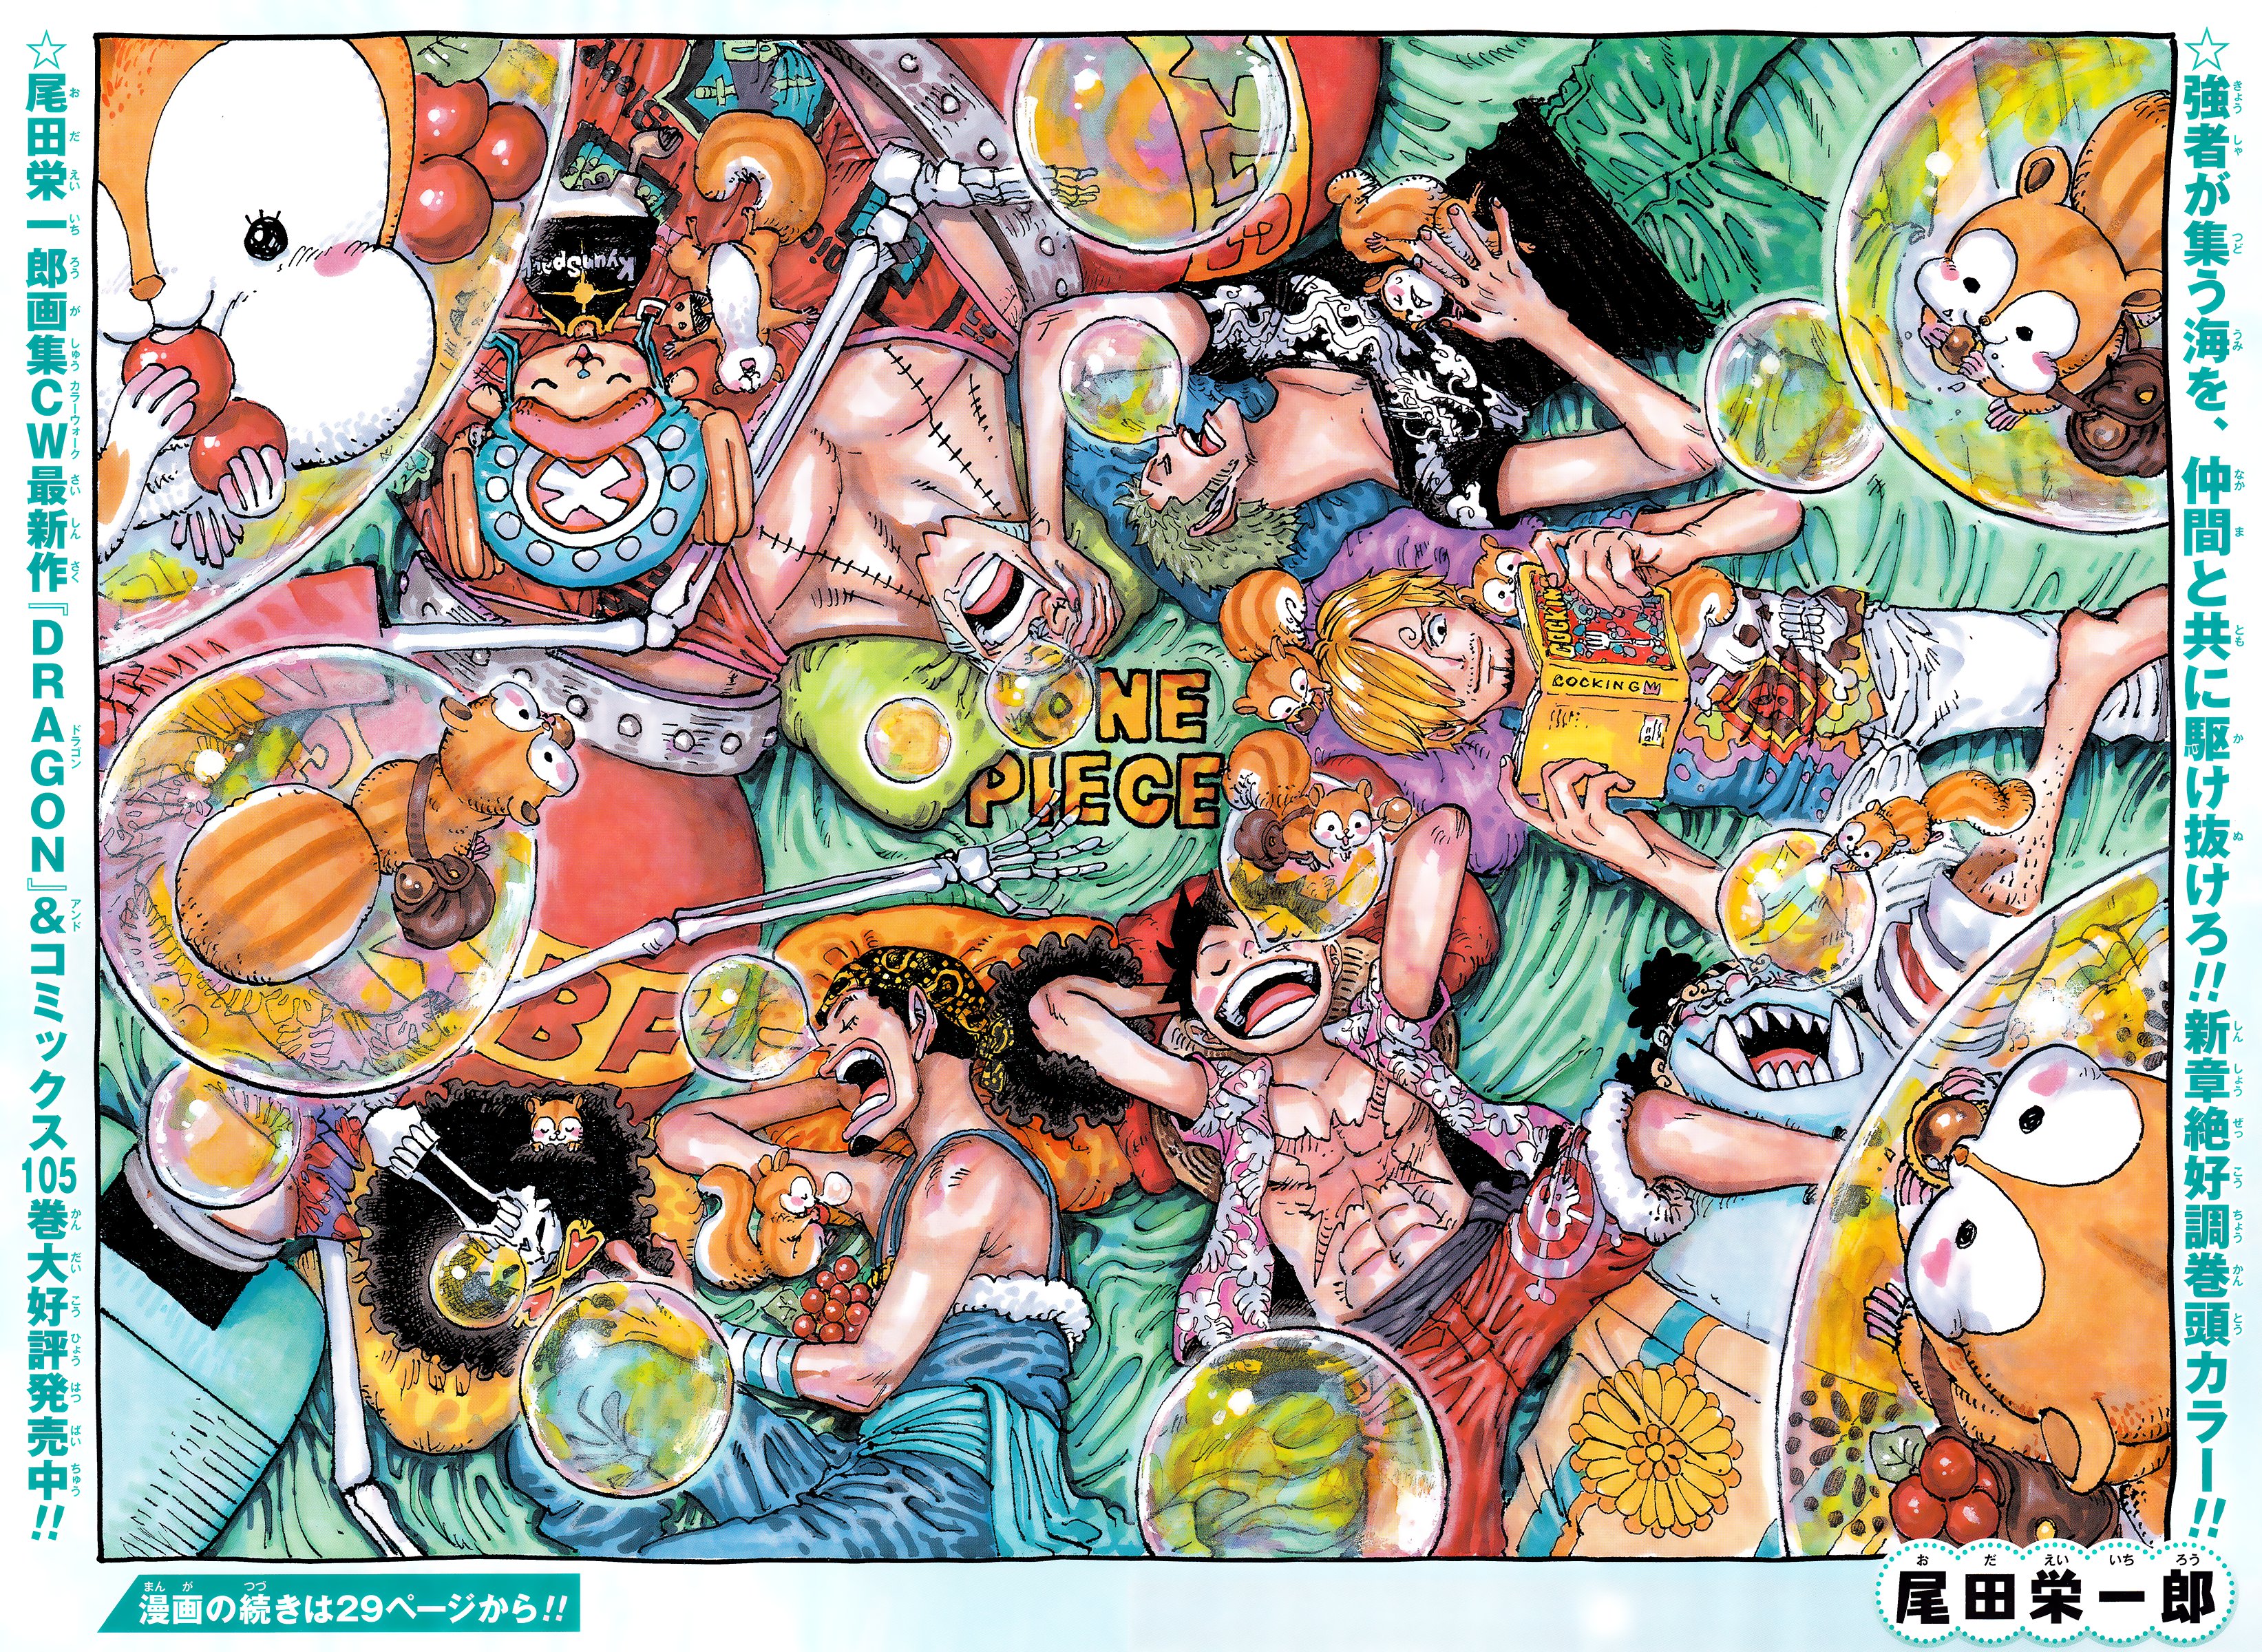 Chapter Discussion - One Piece Chapter 1081, Kuzan, Captain of the 10th  ship of the Blackbeard Pirates, Page 39